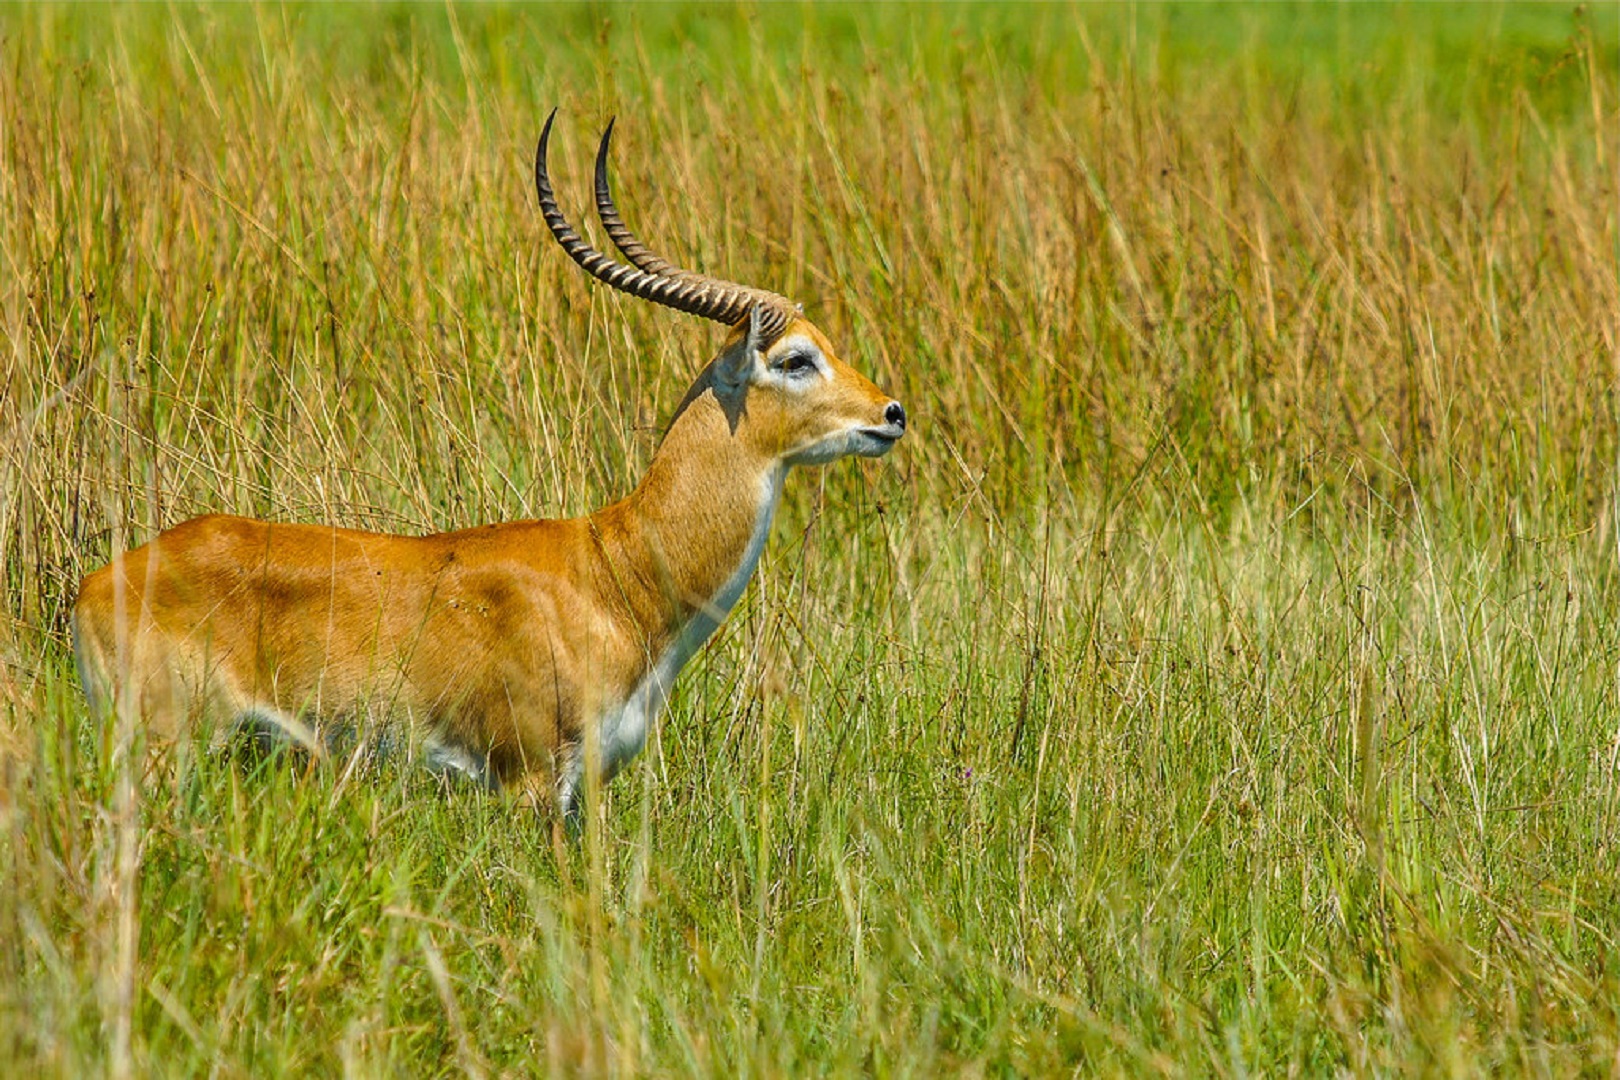 An image of a Ugandan kob, one of the antelopes to see on your luxury wildlife safari to Semuliki National Park